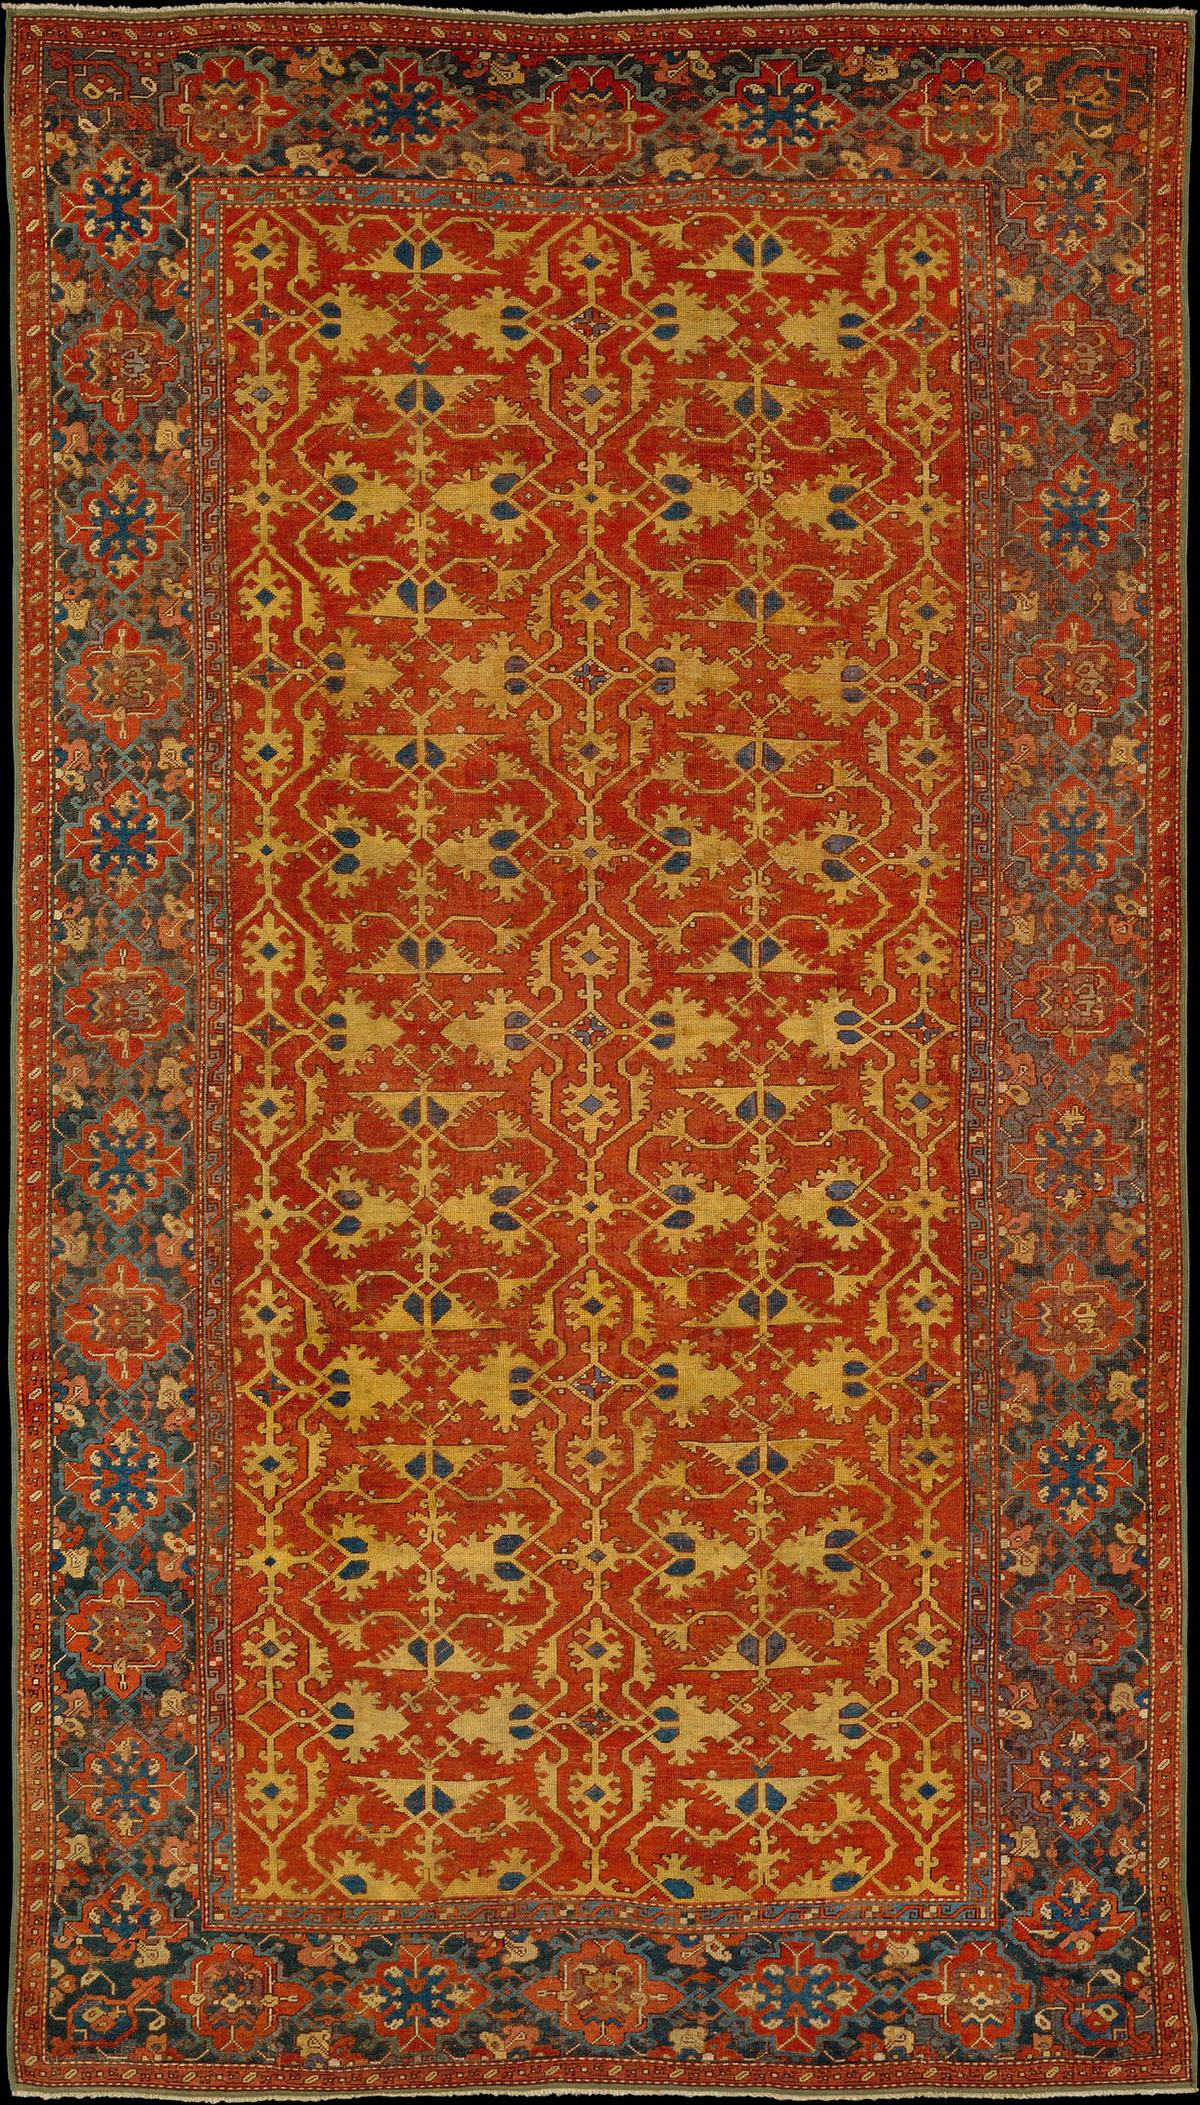 "Lotto" carpets are characterized by yellow arabesque motifs on a red background. "Lotto" Carpet, circa 1600, attributed to Turkey. Wool; 121 1/4 inches by 69 1/4 inches. The Metropolitan Museum of Art, New York City. (Public Domain)